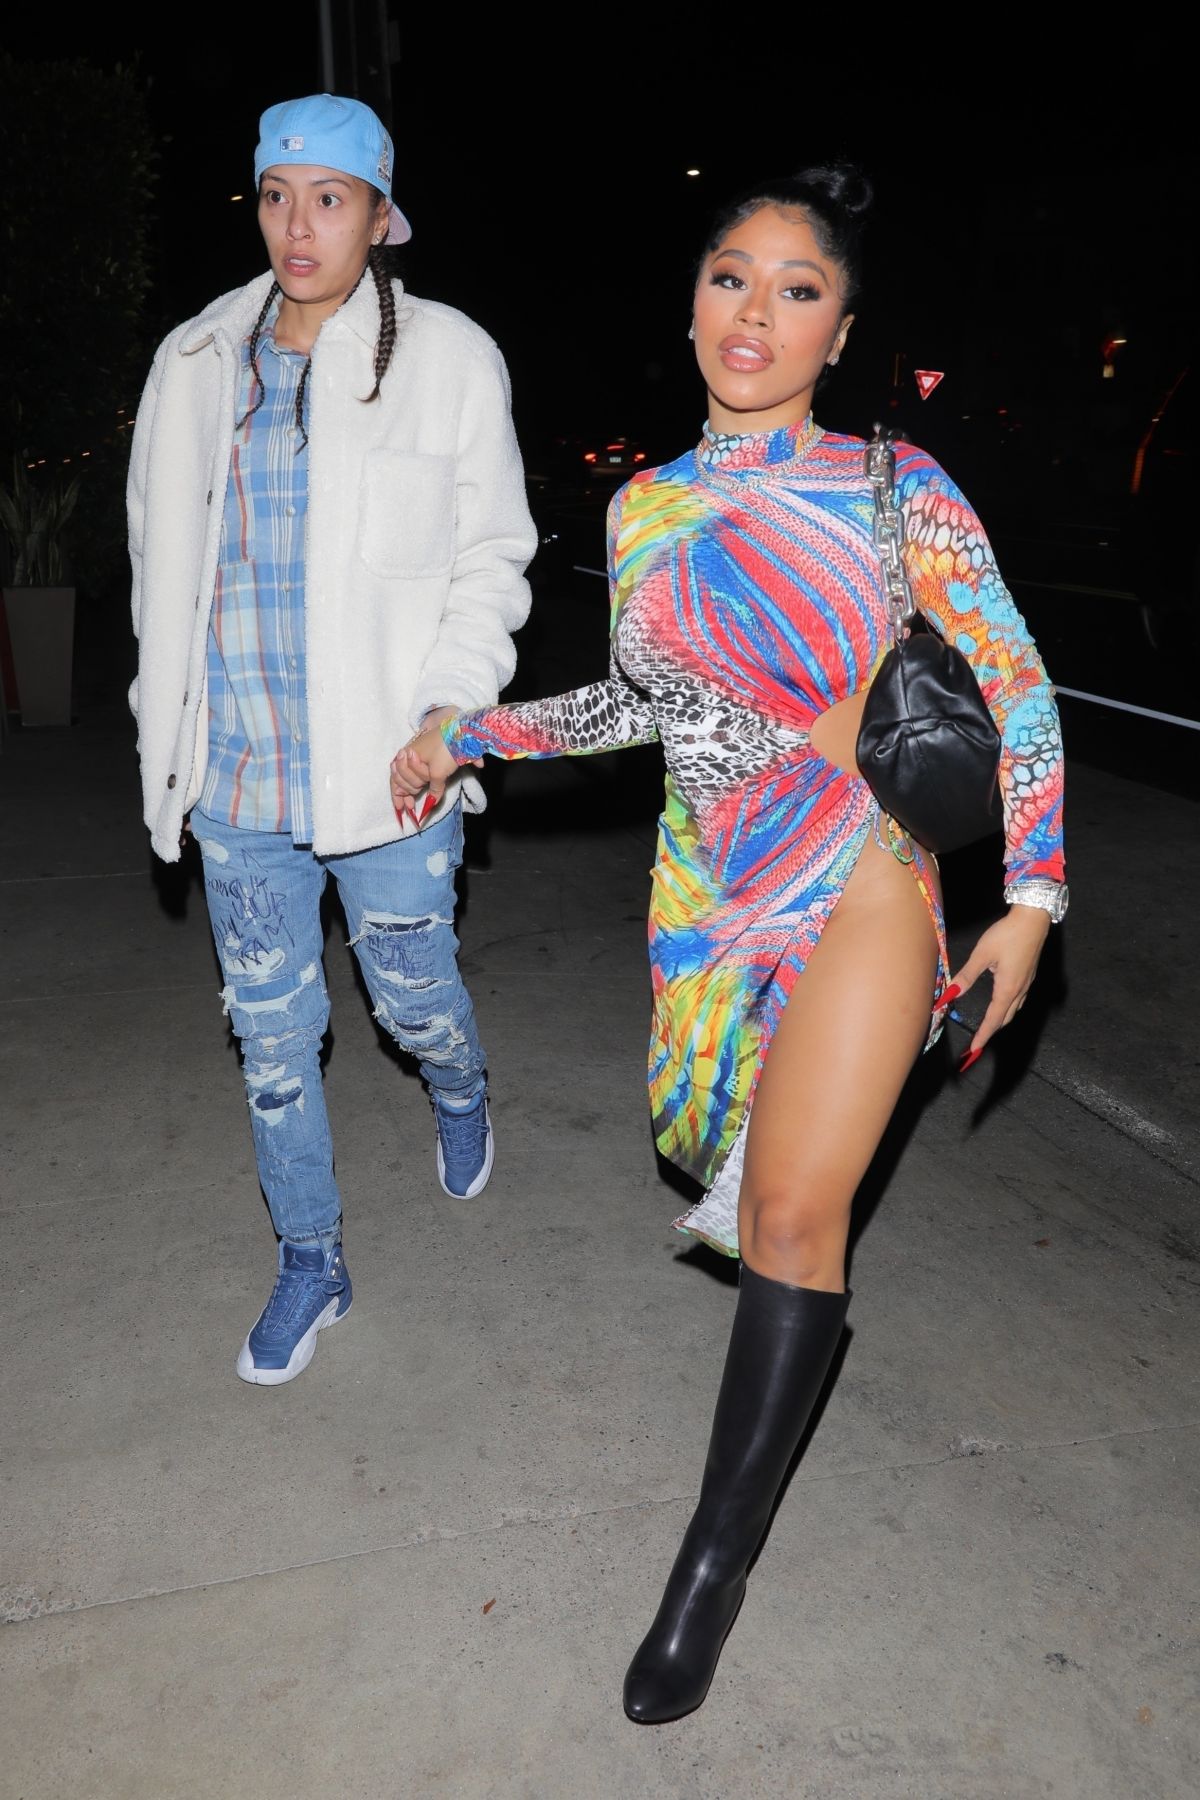 Hennessy Carolina Arrives At Her Sisters Cardi Bs 29th Birthday Party In Los Angeles 1011